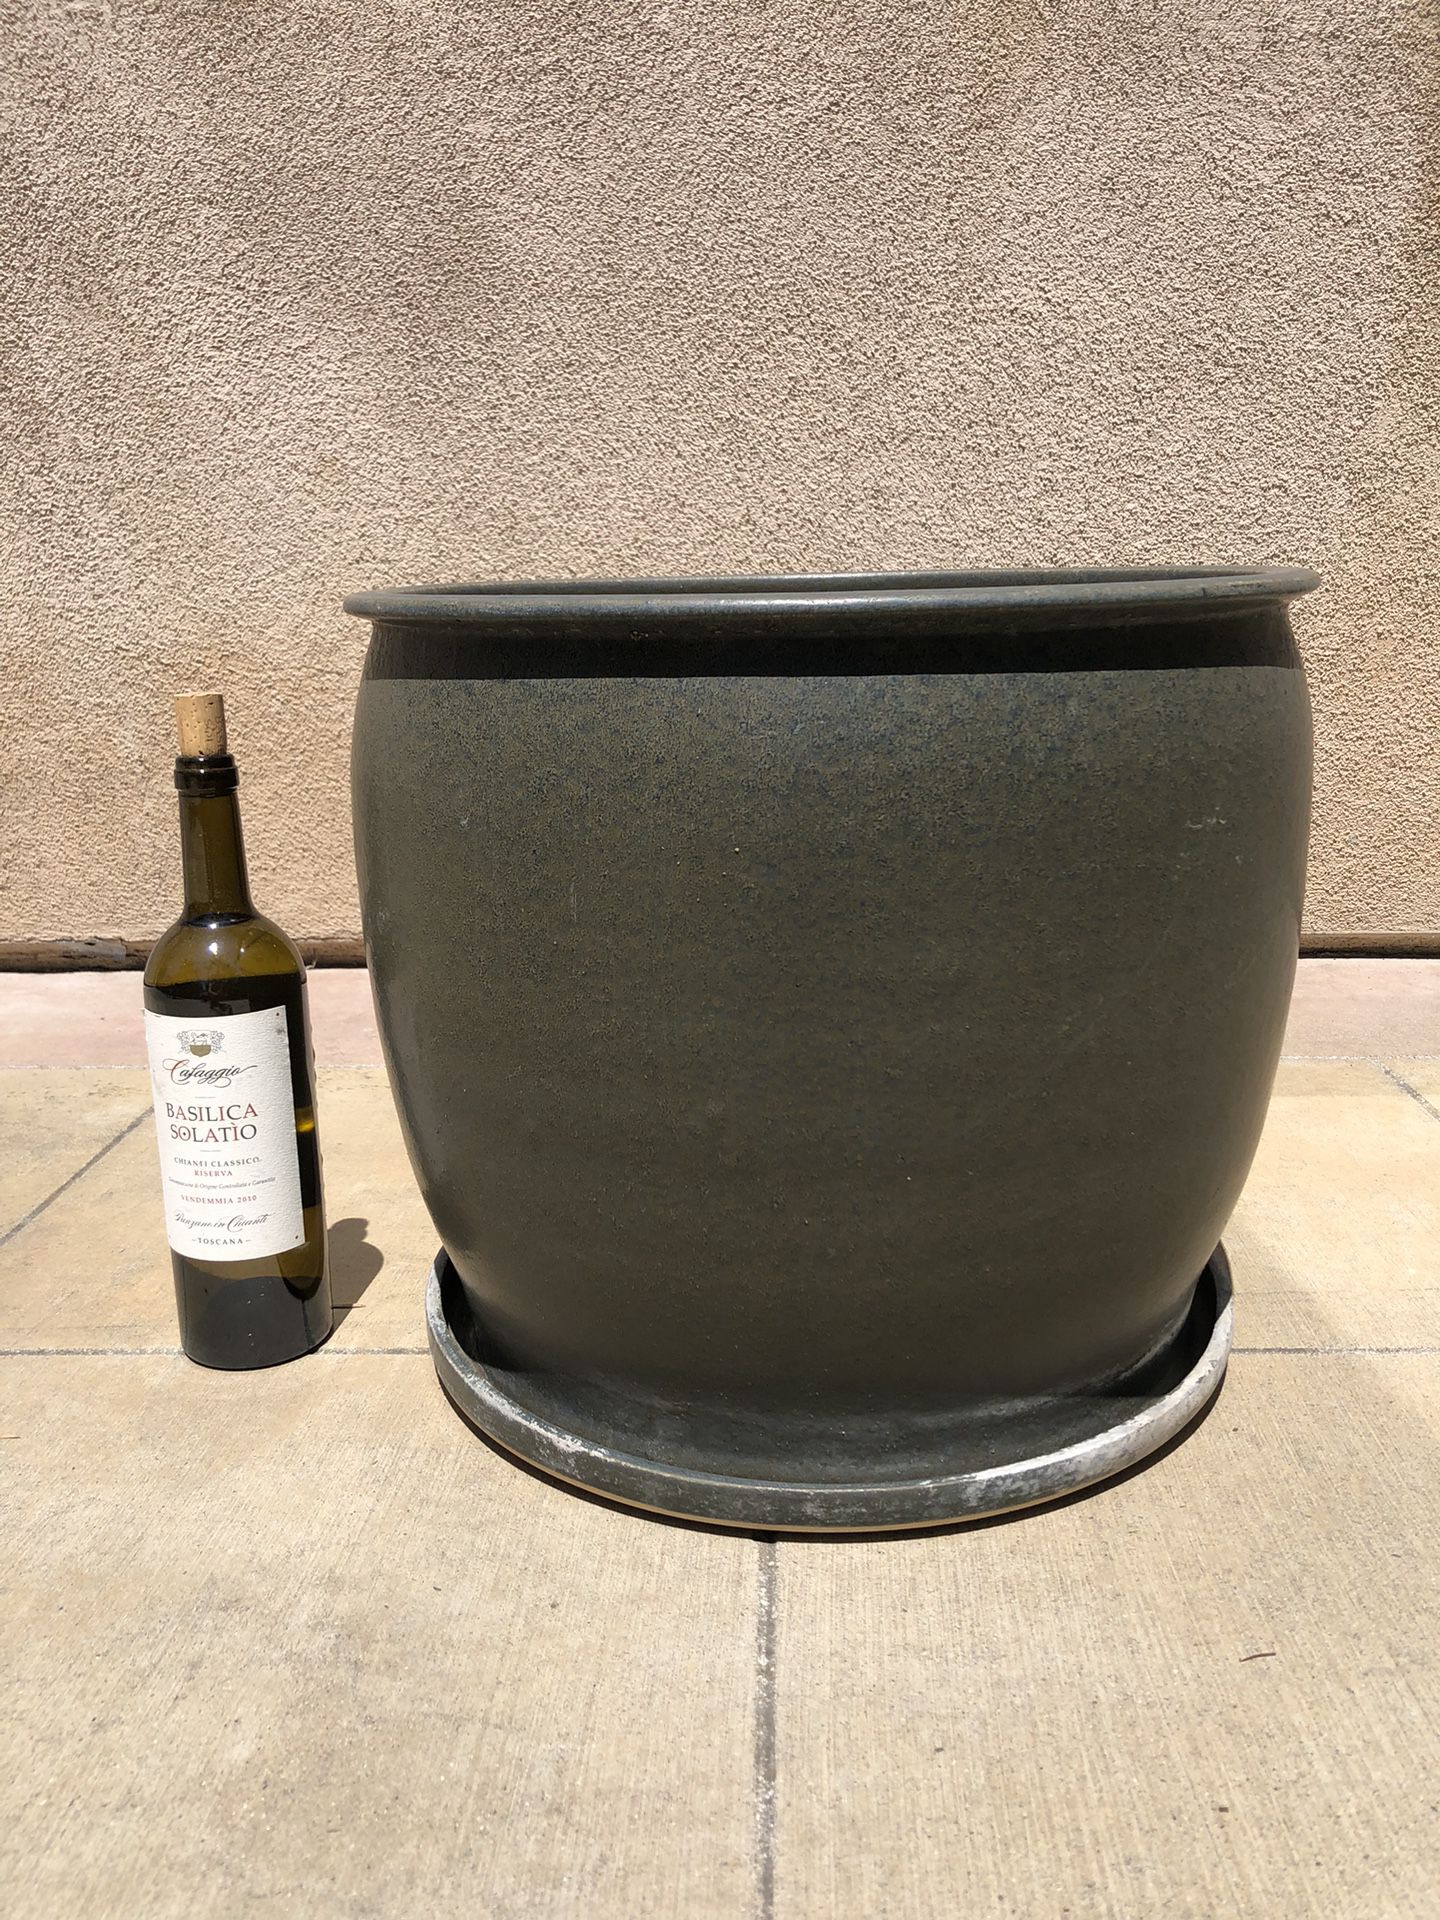 Large Plant Pot with Attached Saucer